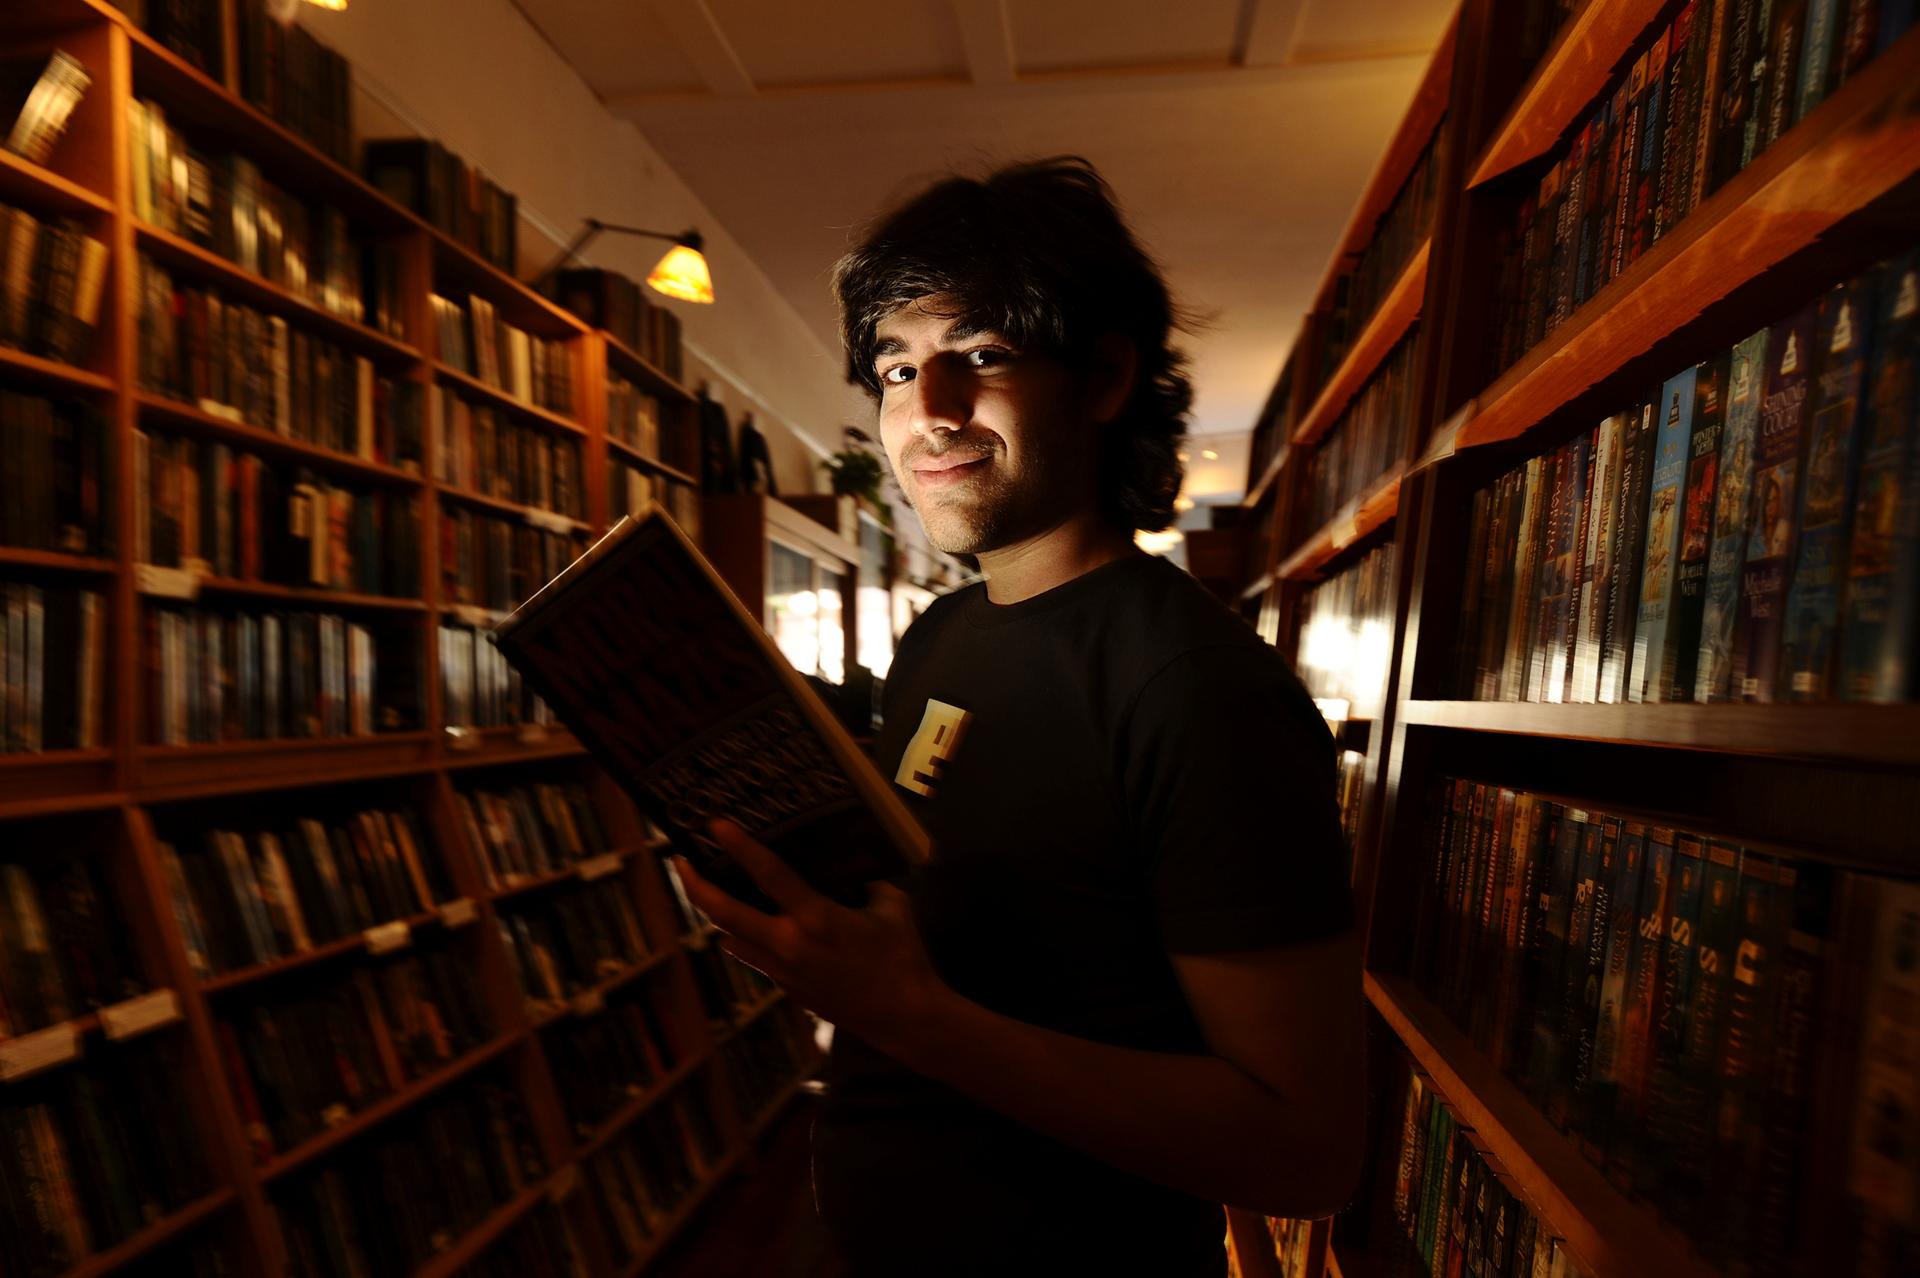 Aaron Swartz poses in a Borderland Books in San Francisco. The Internet activist is the subject of new documentary about his life, activism and death.